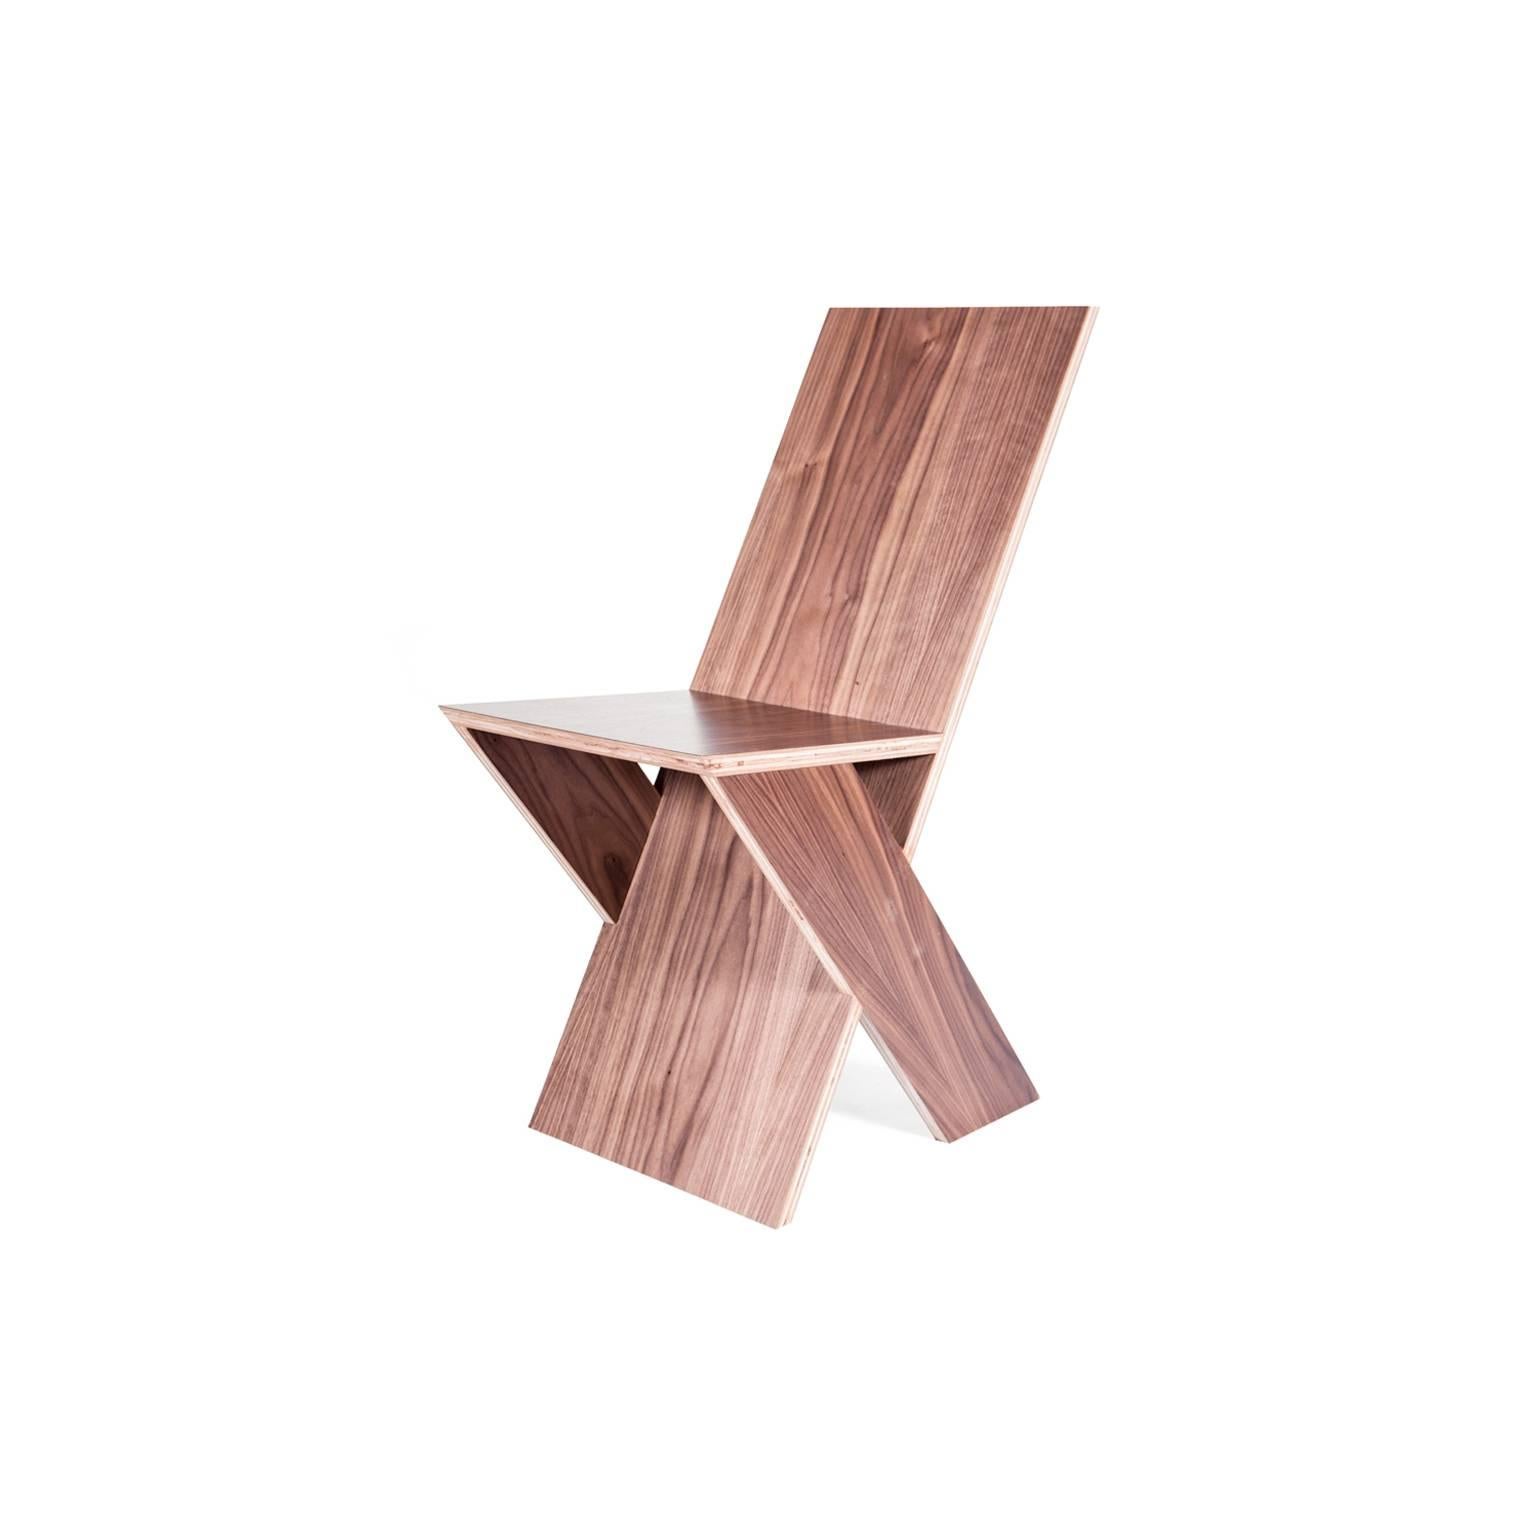 Plank side chair by Michael Boyd for PLANEfurniture. Offered here in zebrawood. From the PLANE series. 

The PLANKseries is the most uncompromising. Four flat planes are invisibly joined to create a chair that is elemental as a child's drawing.